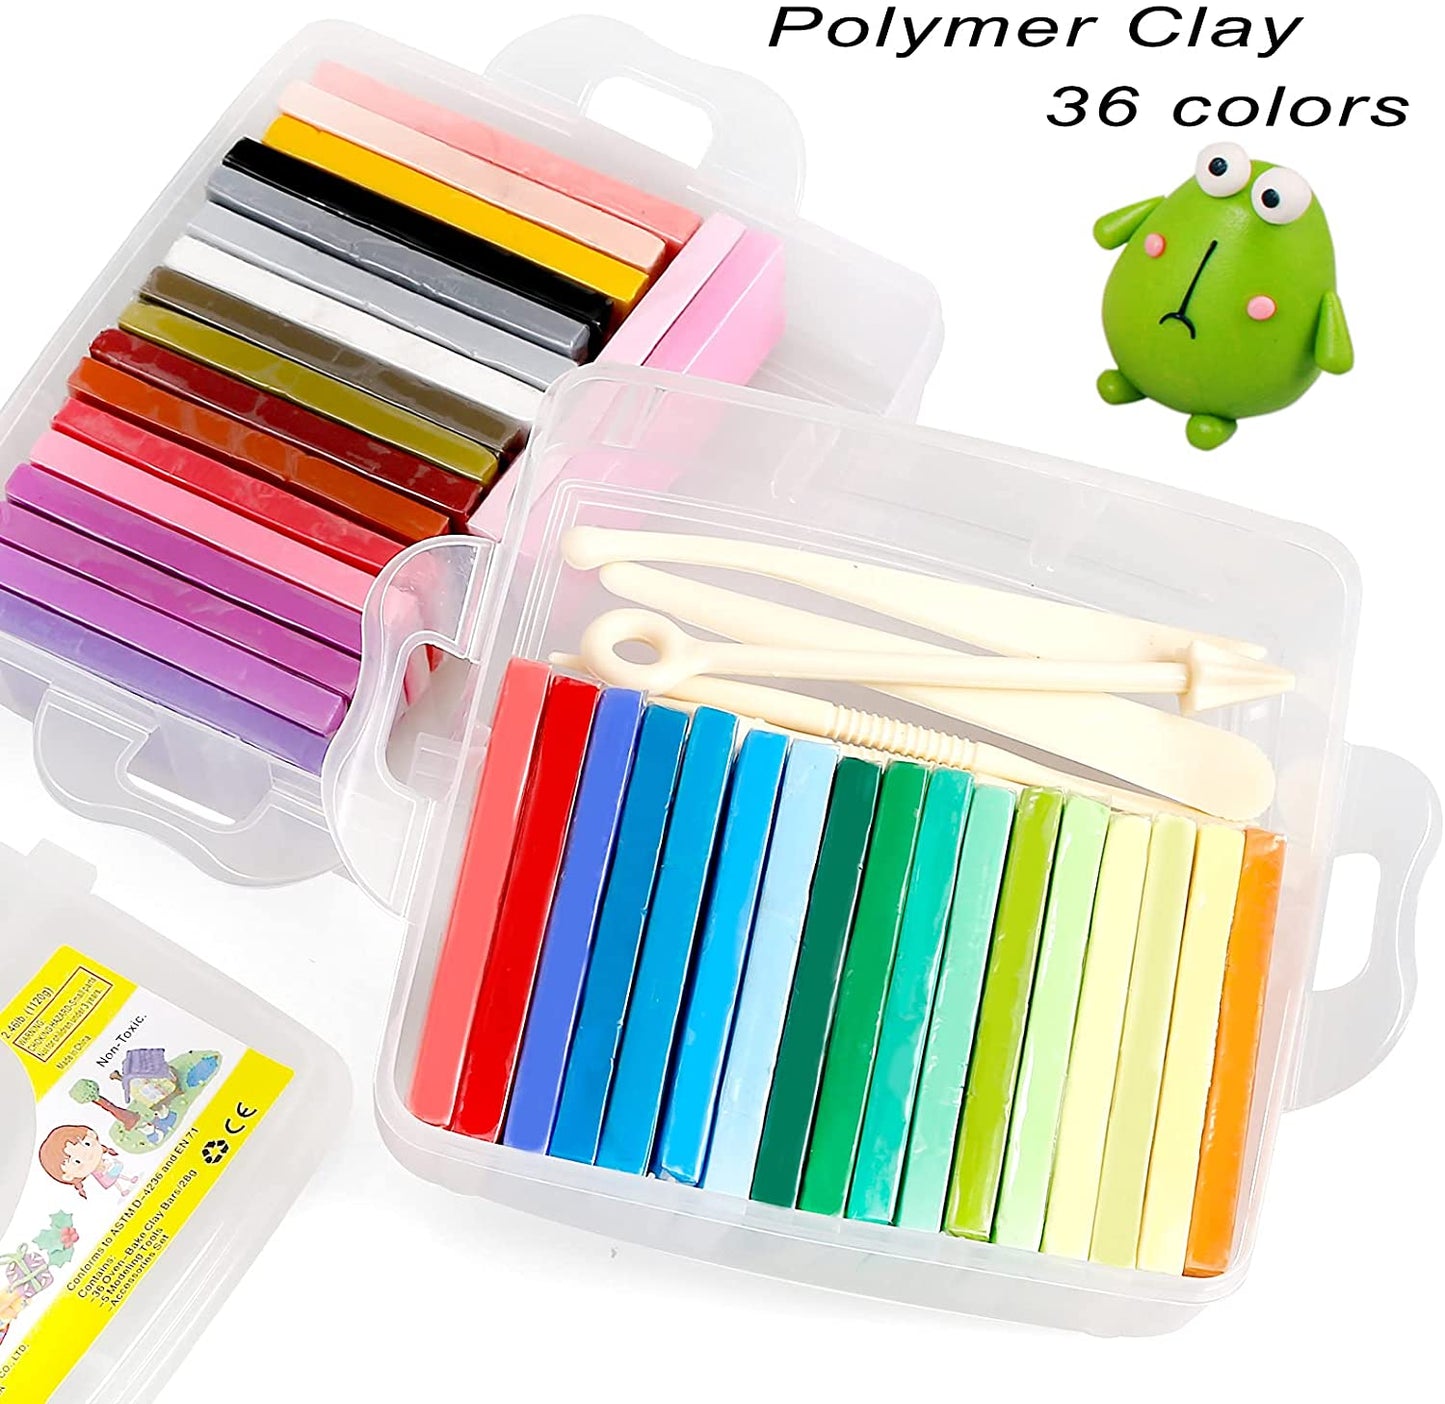 Definite Art & Craft 100gm Make n Bake Polymer Clay Oven  Baked Clay + 8Pc Modelling Tools - Art Clay and Modelling Tool